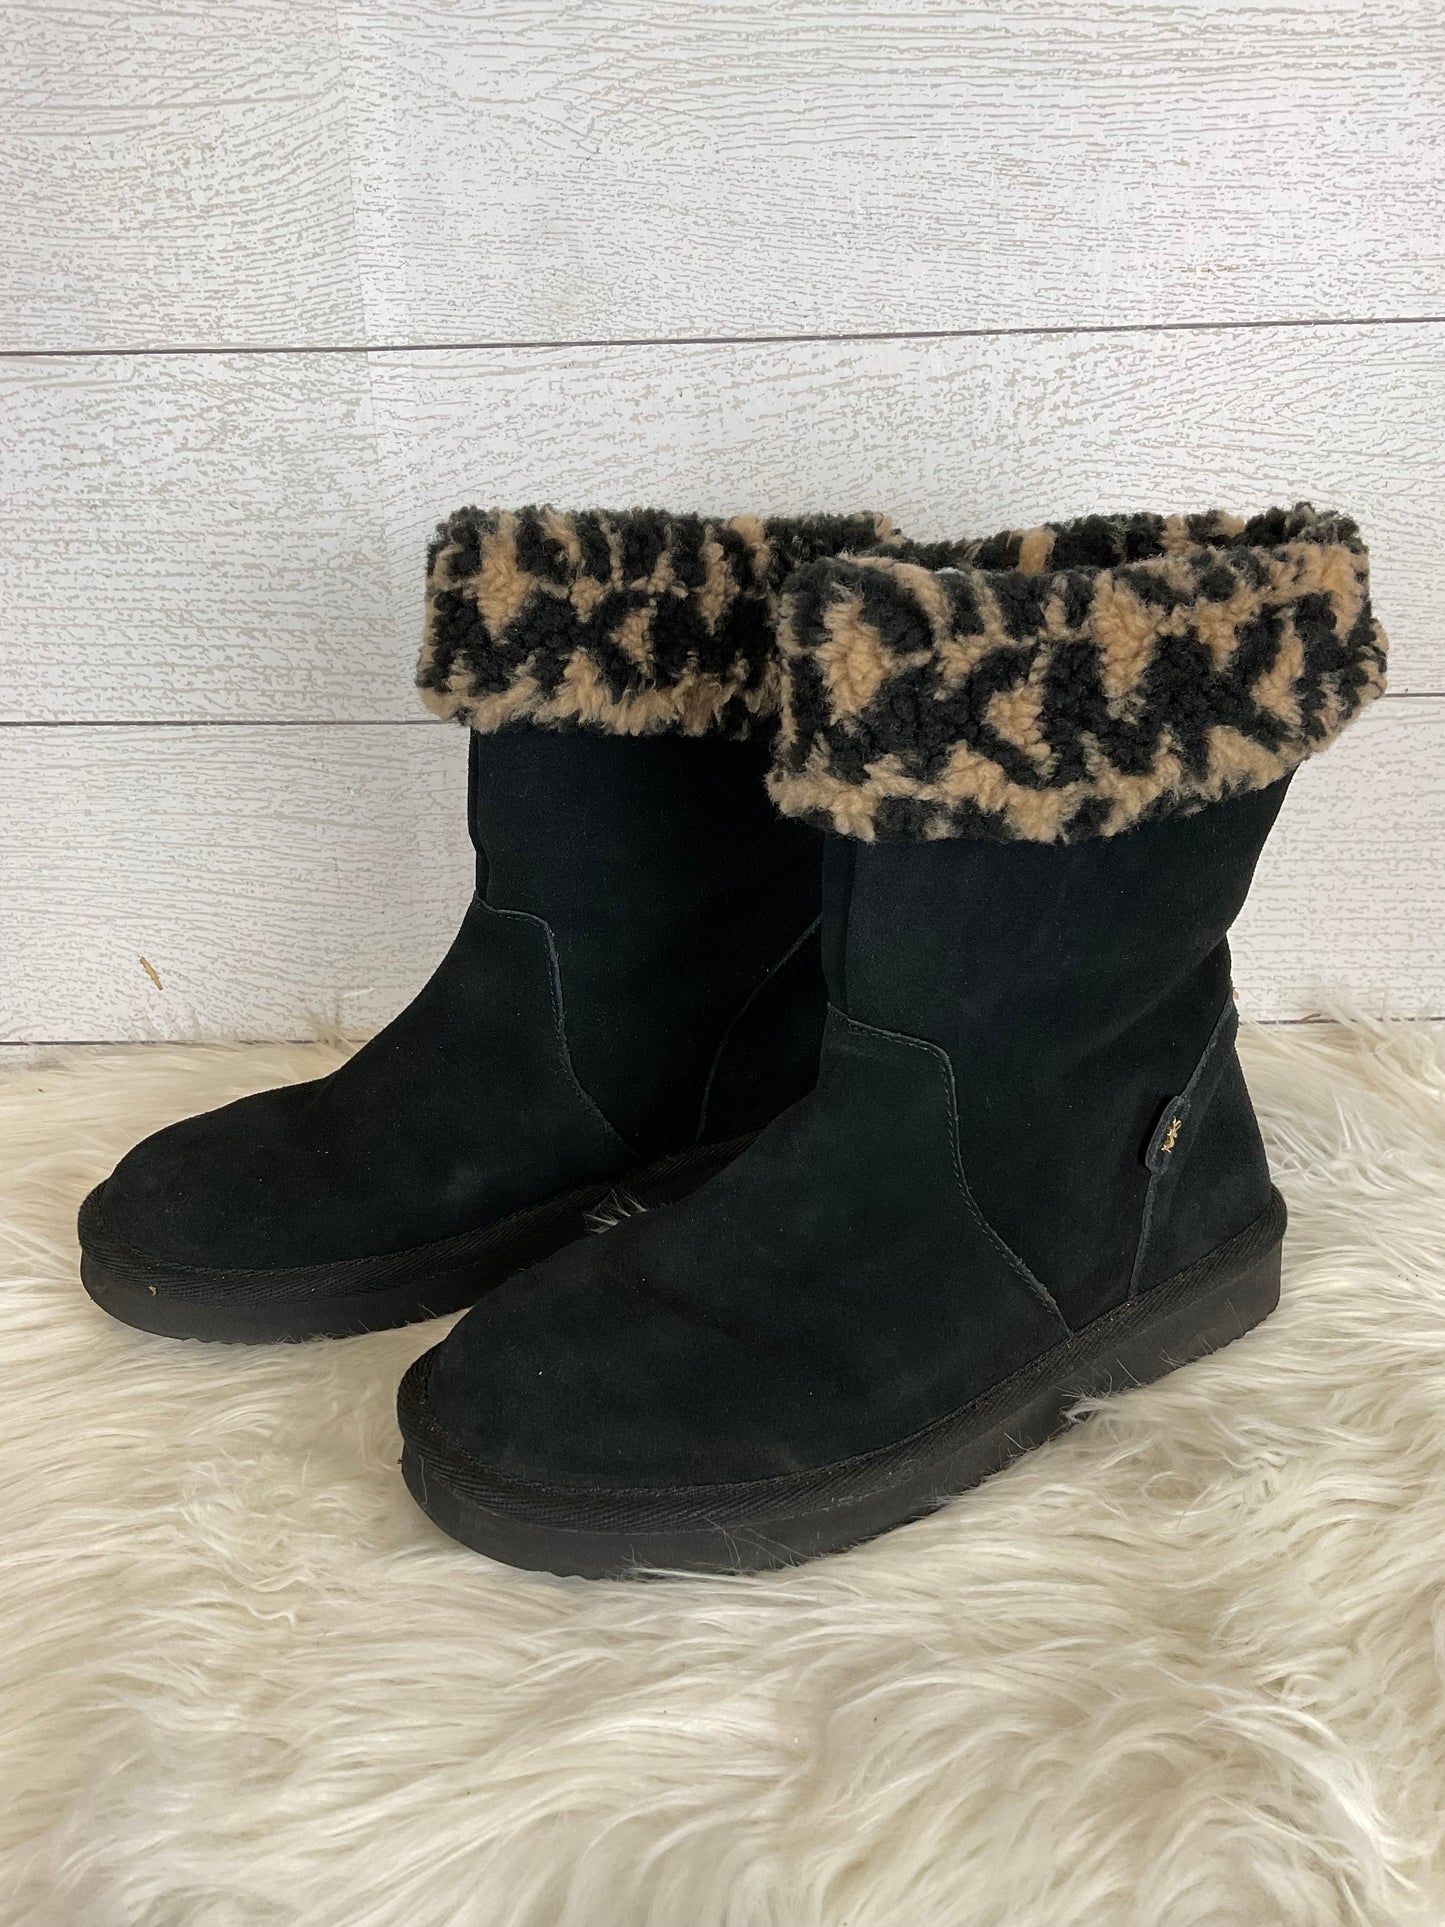 Boots Designer By Michael Kors  Size: 7